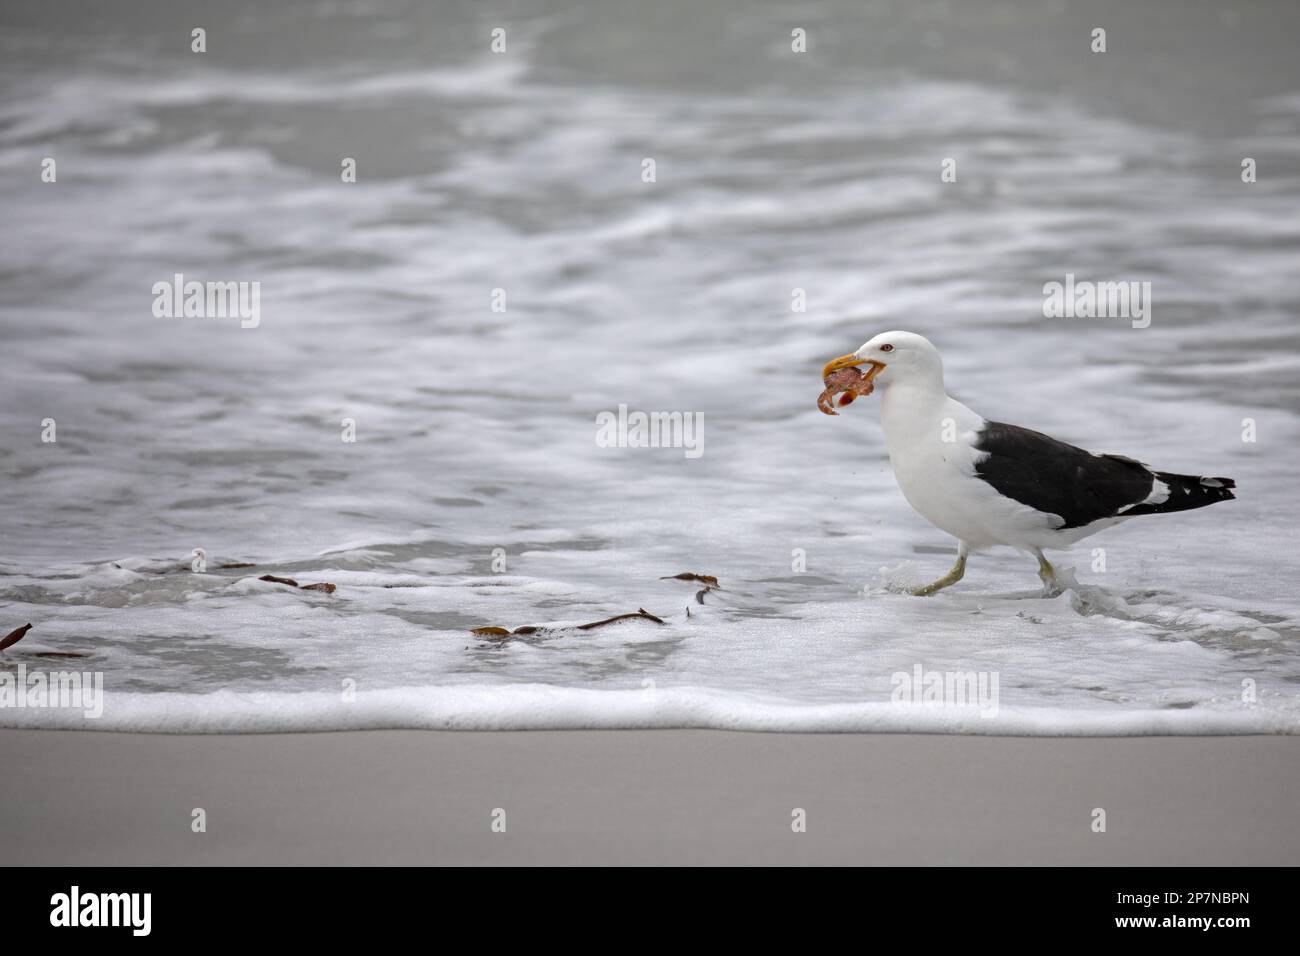 A Kelp Gull, Larus Dominicanus, with a Shore Crab in its mouth, on The Falkland Islands. Stock Photo